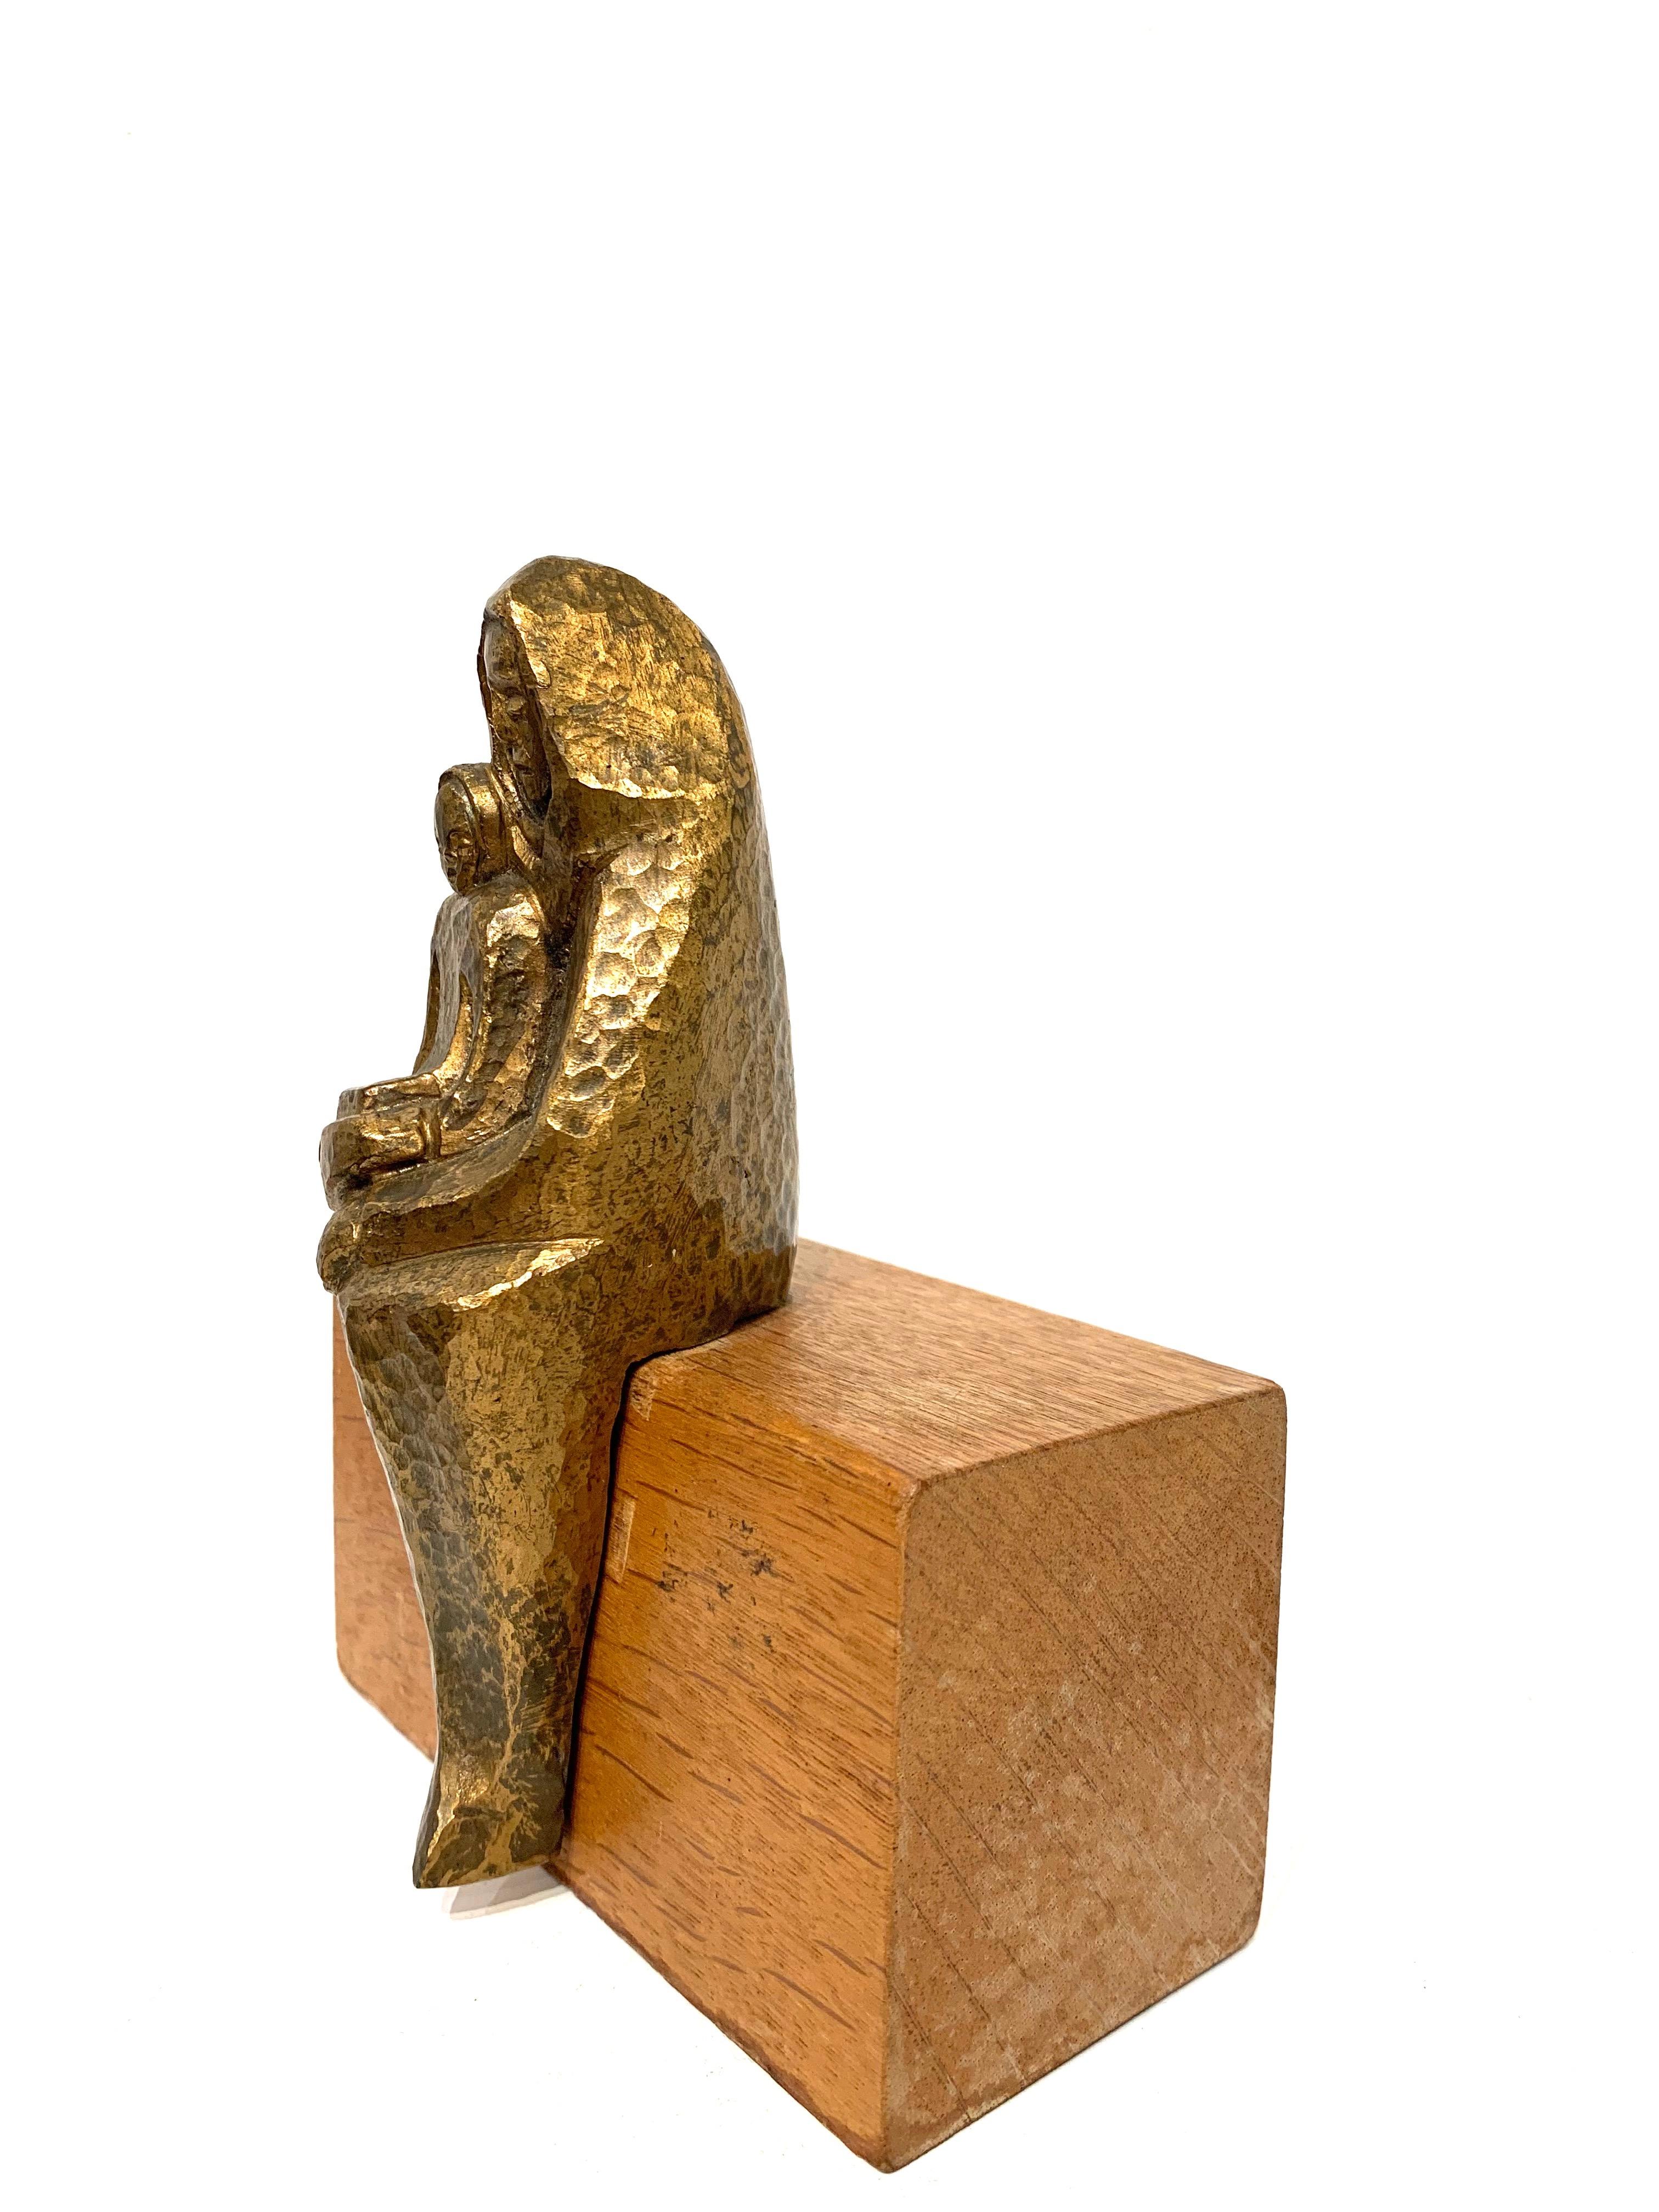 Petite sculpture of mother and child. Brass-plated, not signed or dated.